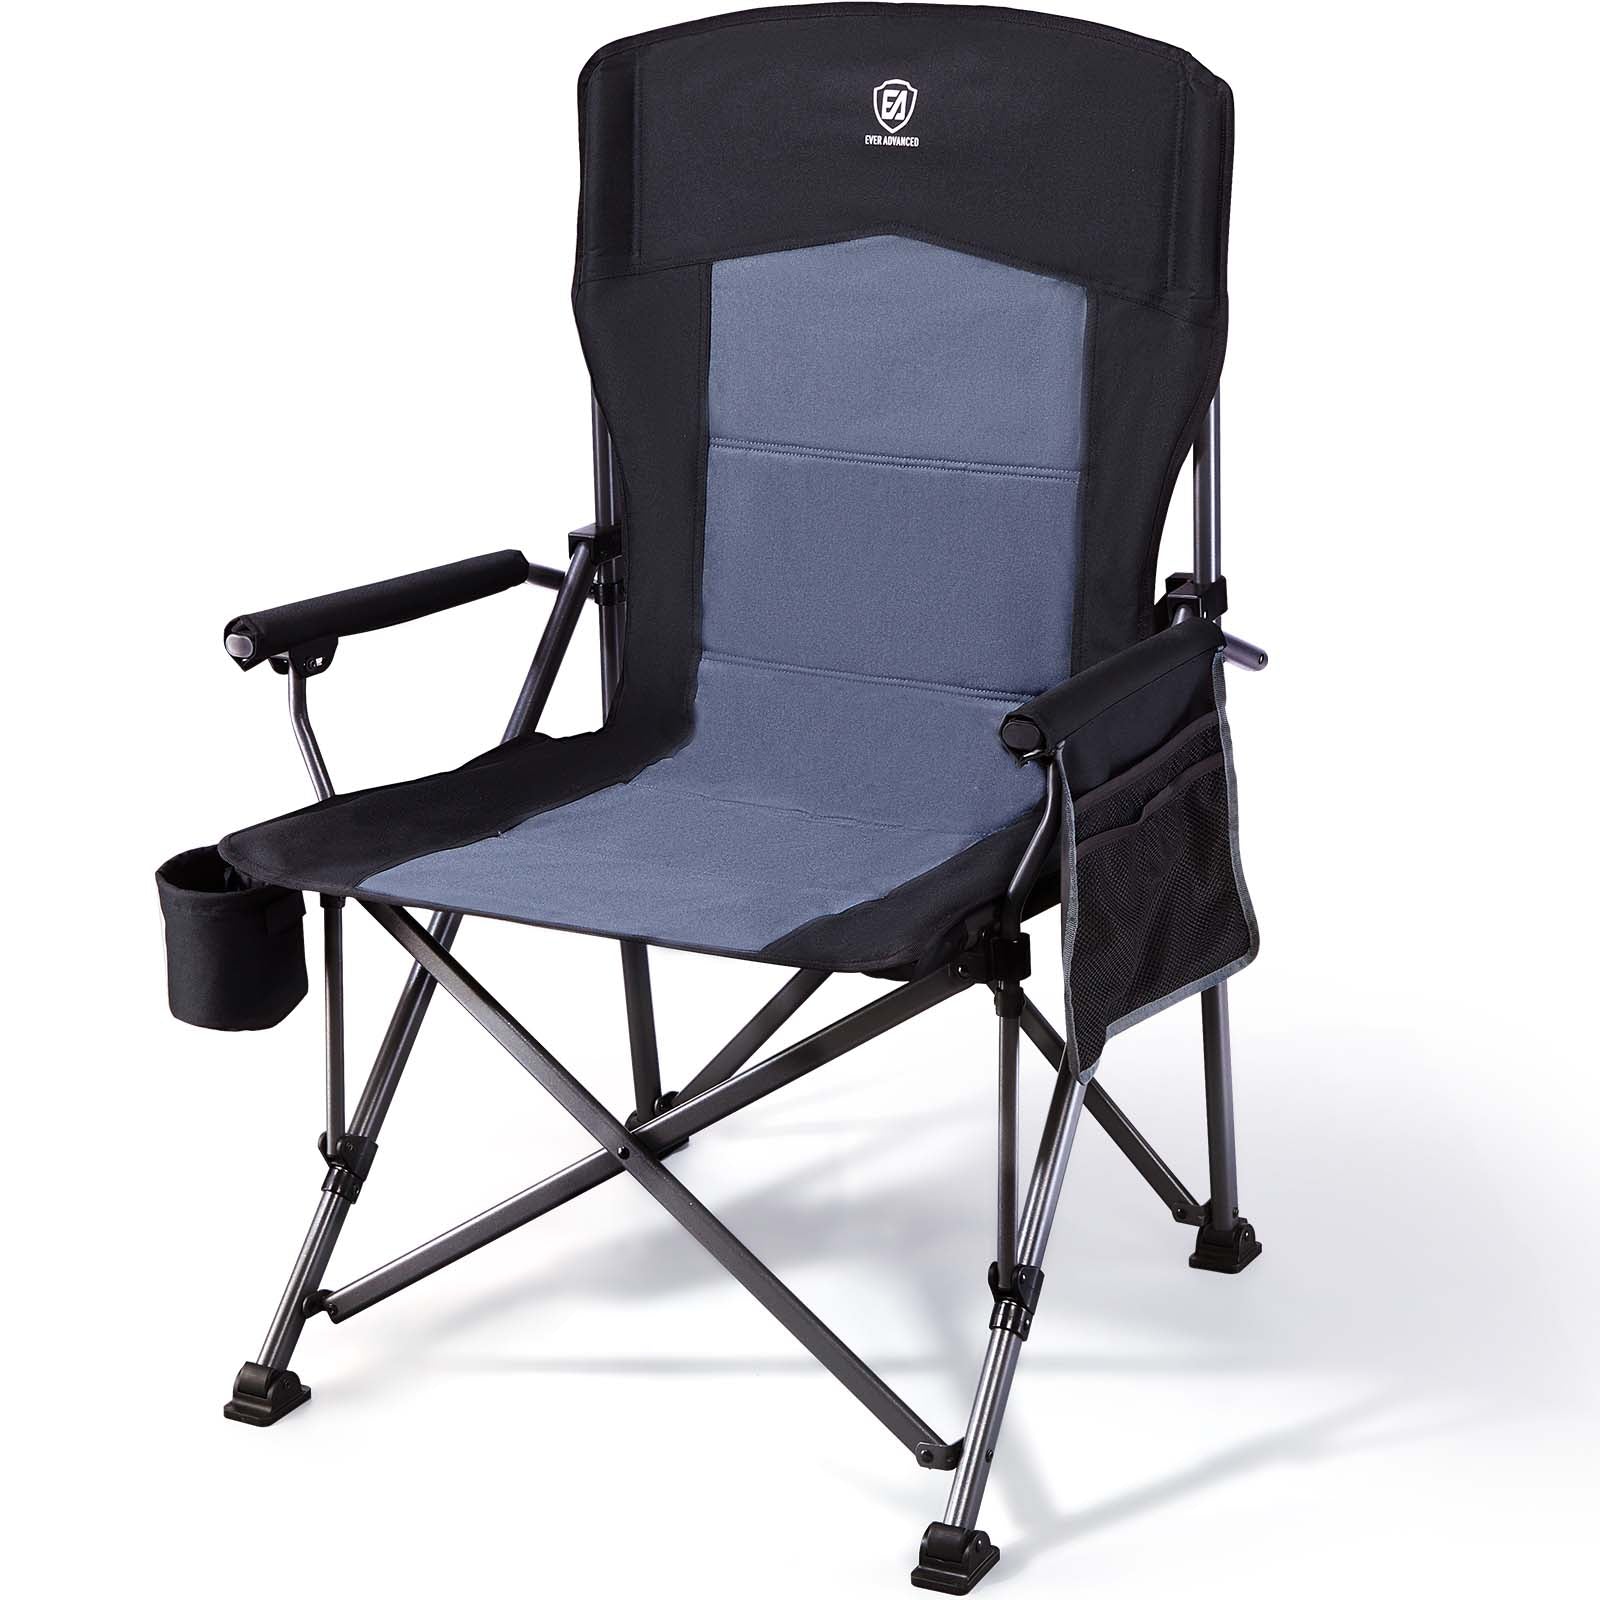 Oversized Camping Chair